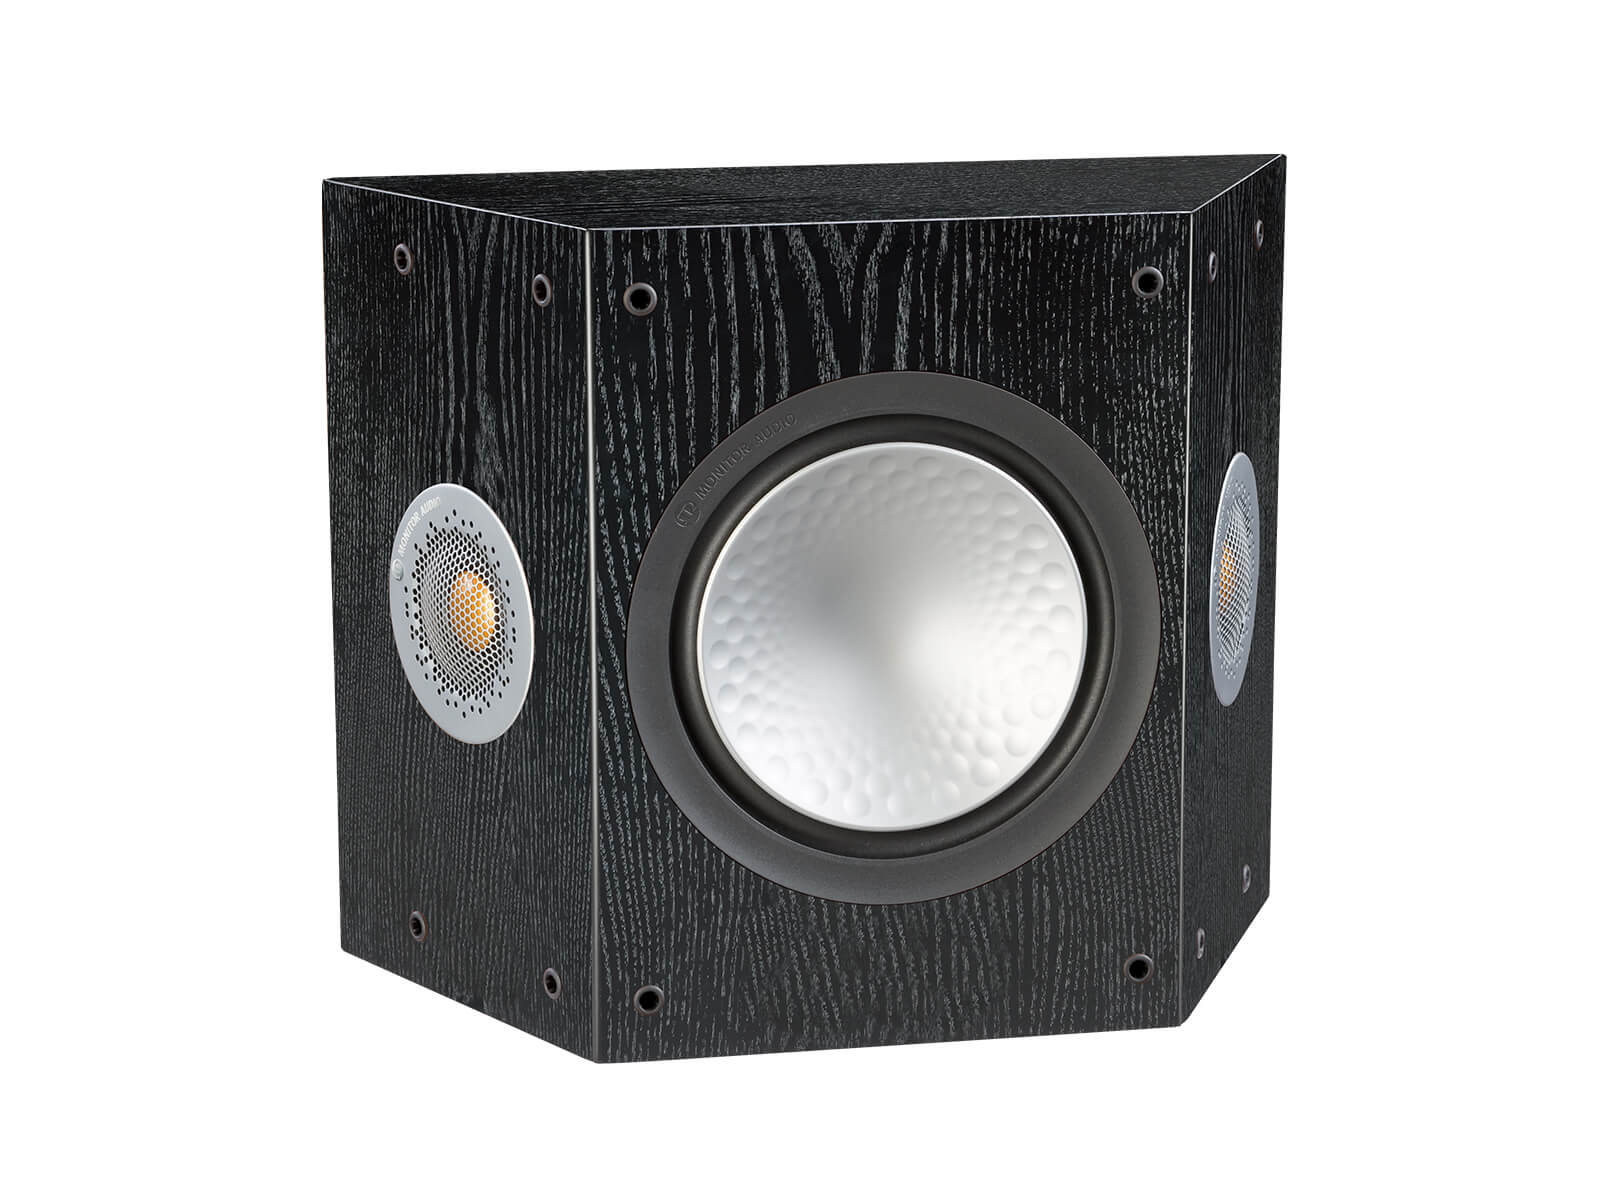 Silver FX, grille-less surround speakers, with a black oak finish.